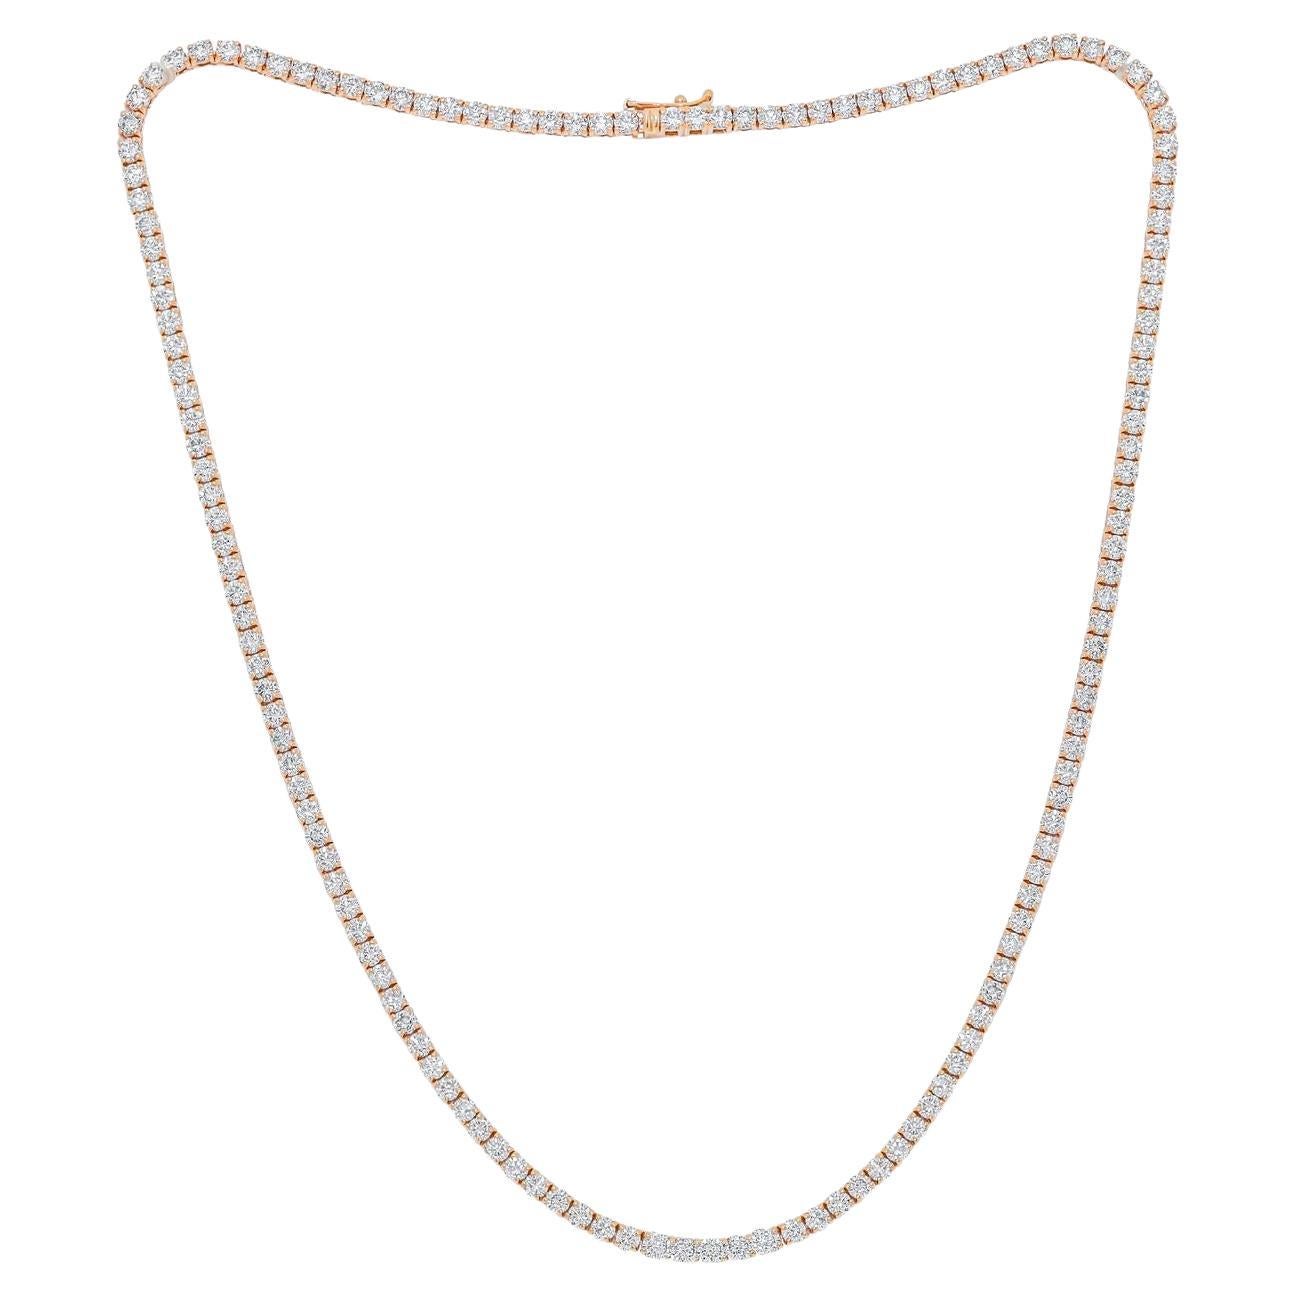 Diana M. 14kt Rose Gold Graduated  Reviera Tennis Necklace Featuring 10.20 cts 